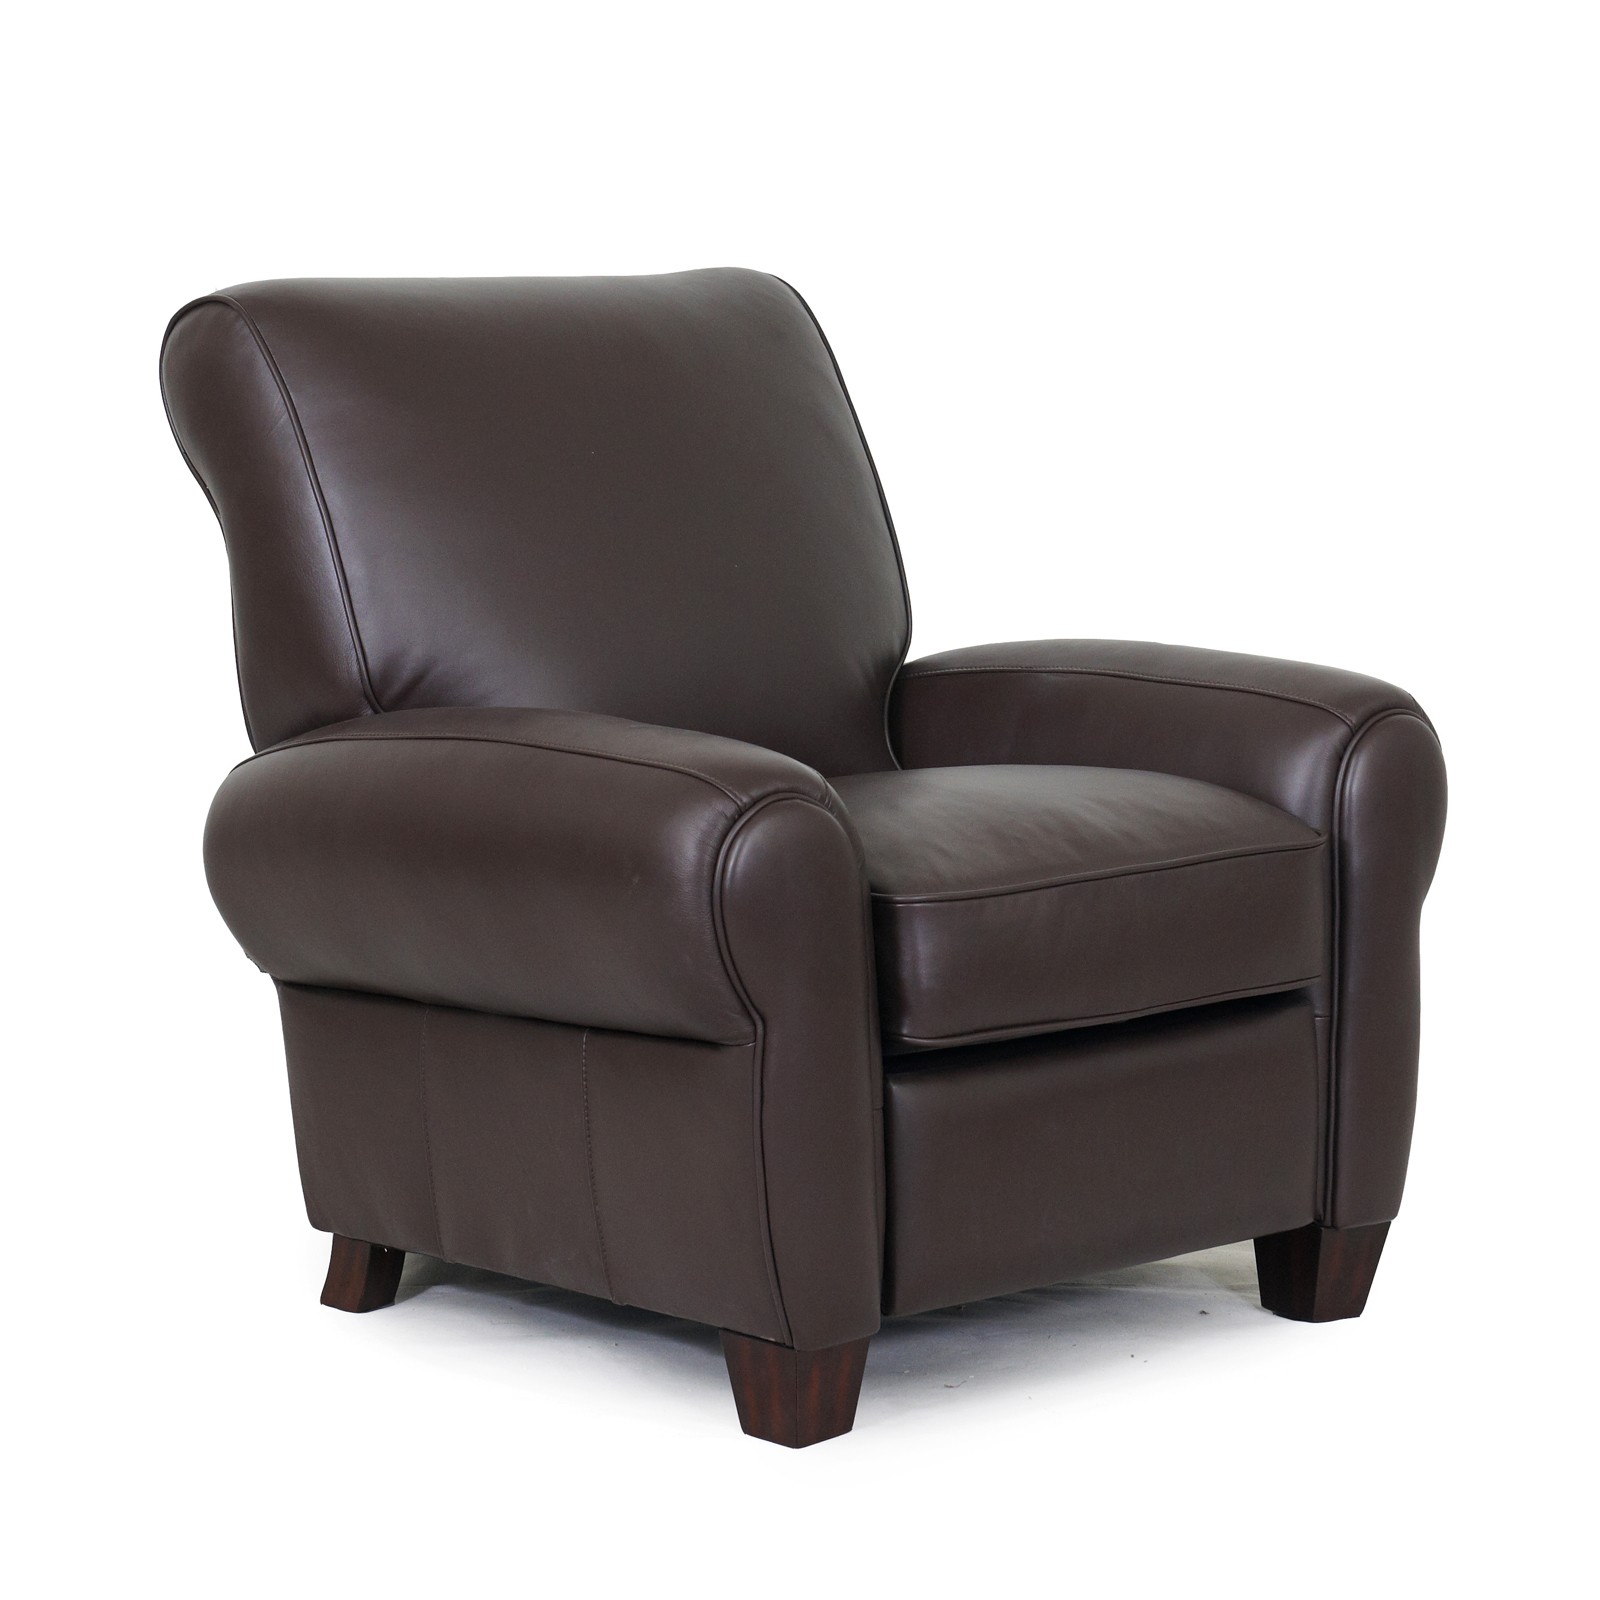 Barcalounger lectern ii leather oversized recliner at